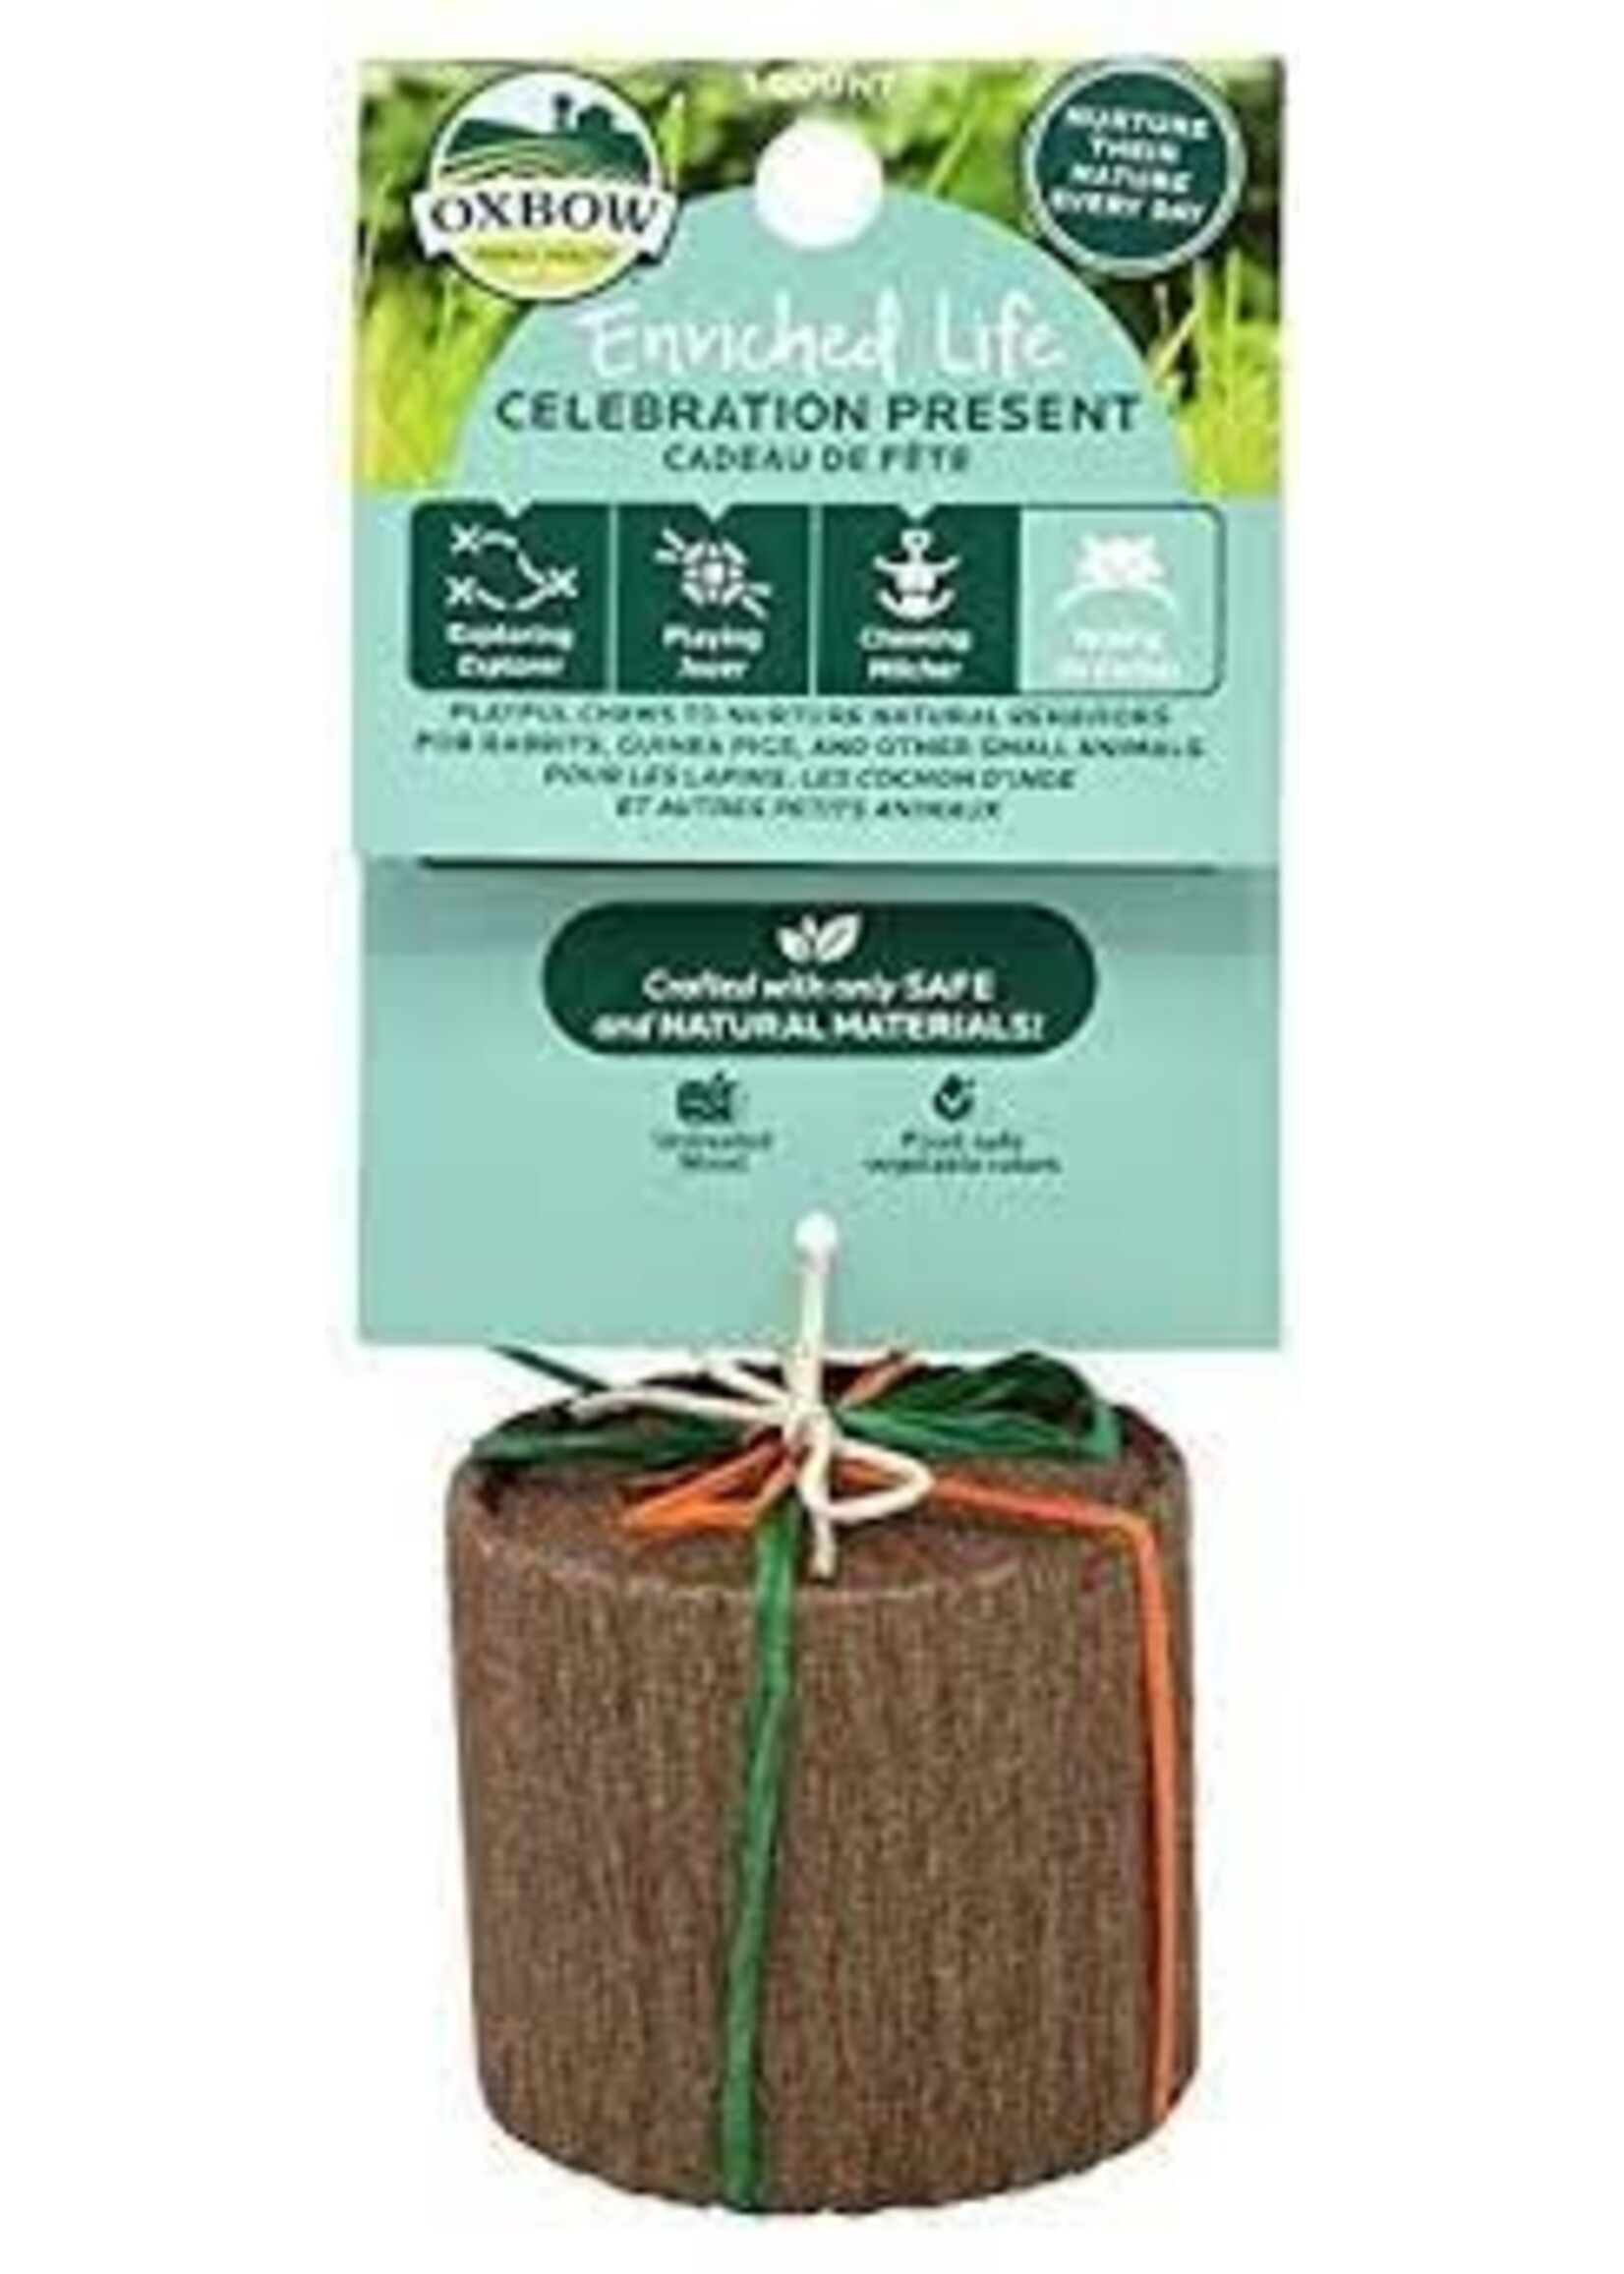 Oxbow Oxbow Enriched Life Celebration Present Natural Chews